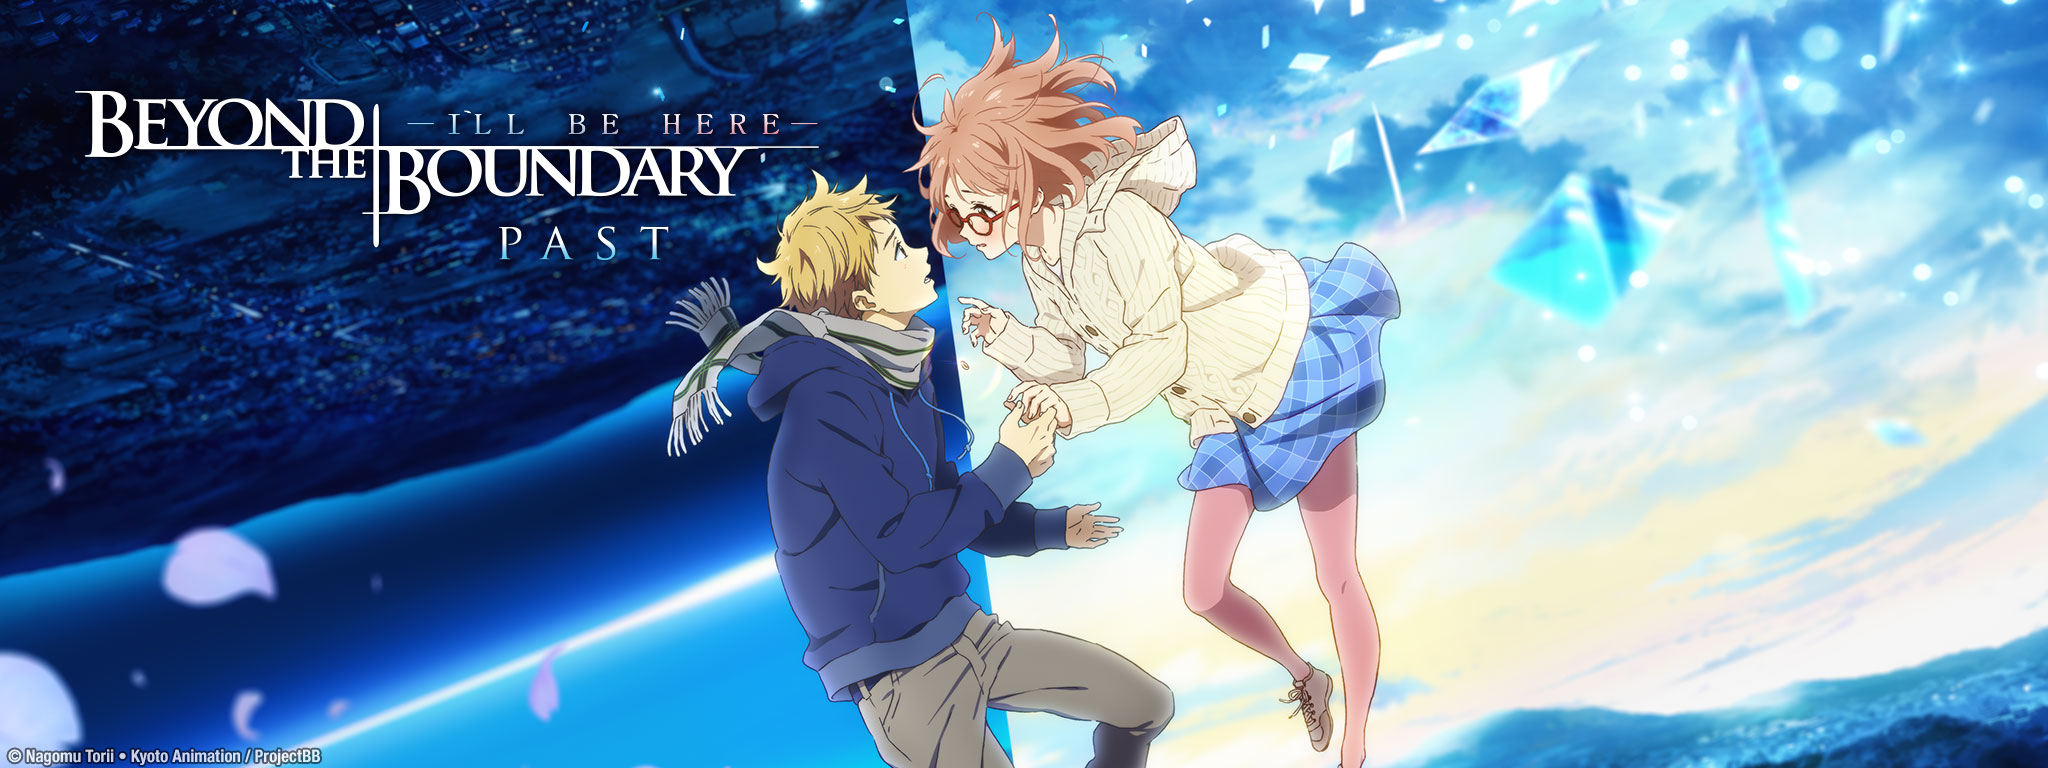 Title Art for Beyond the Boundary -I'LL BE HERE-: Past